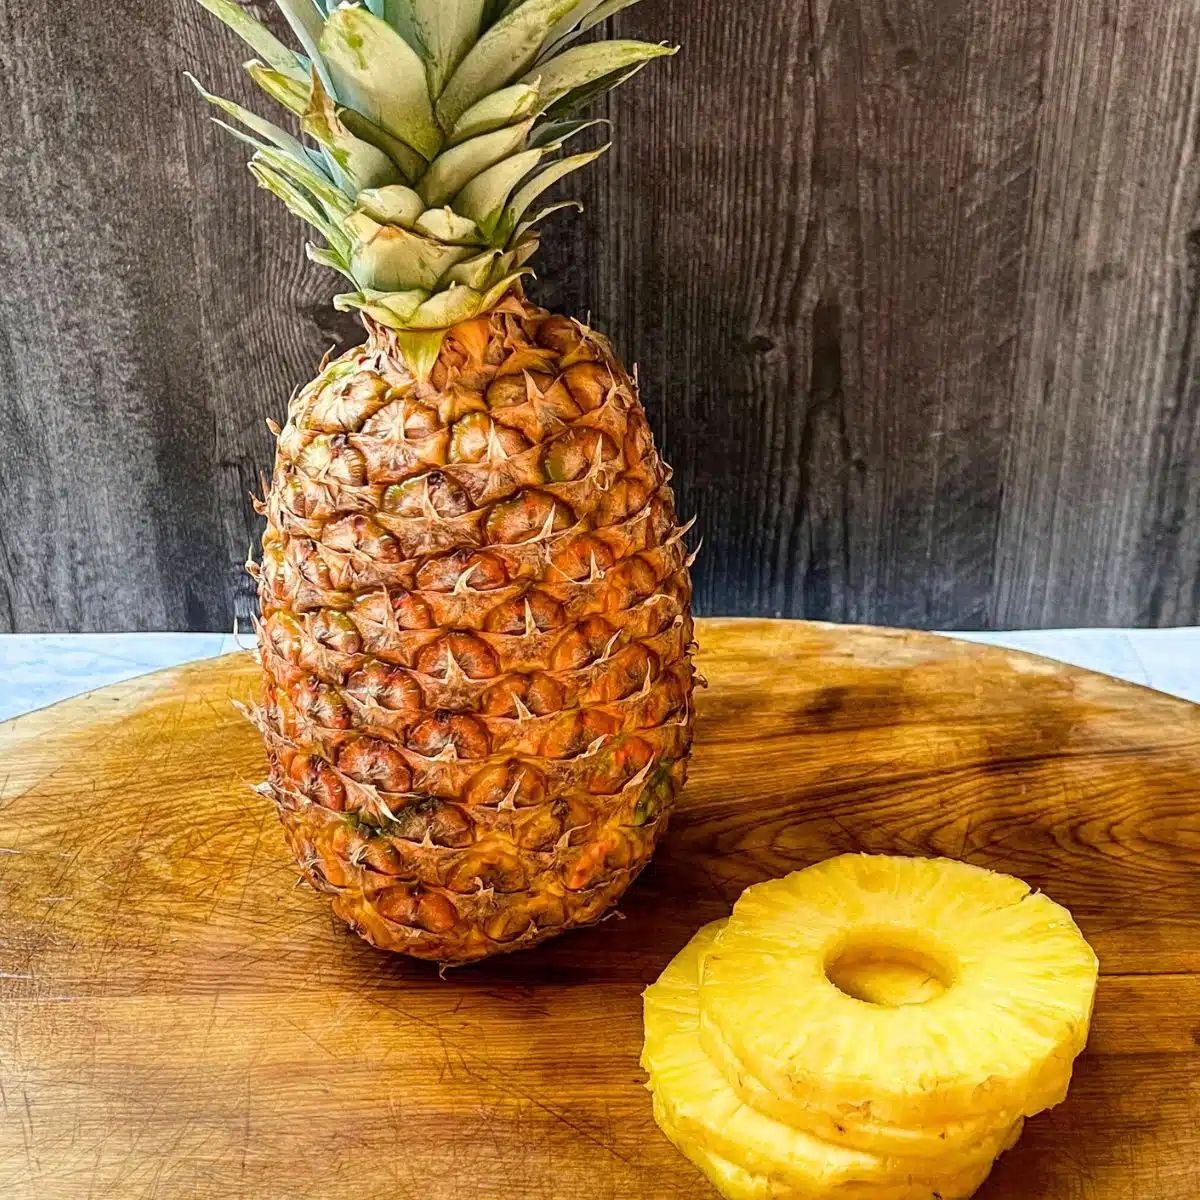 How to cut pineapple. Whole pineapple with slices on board. 